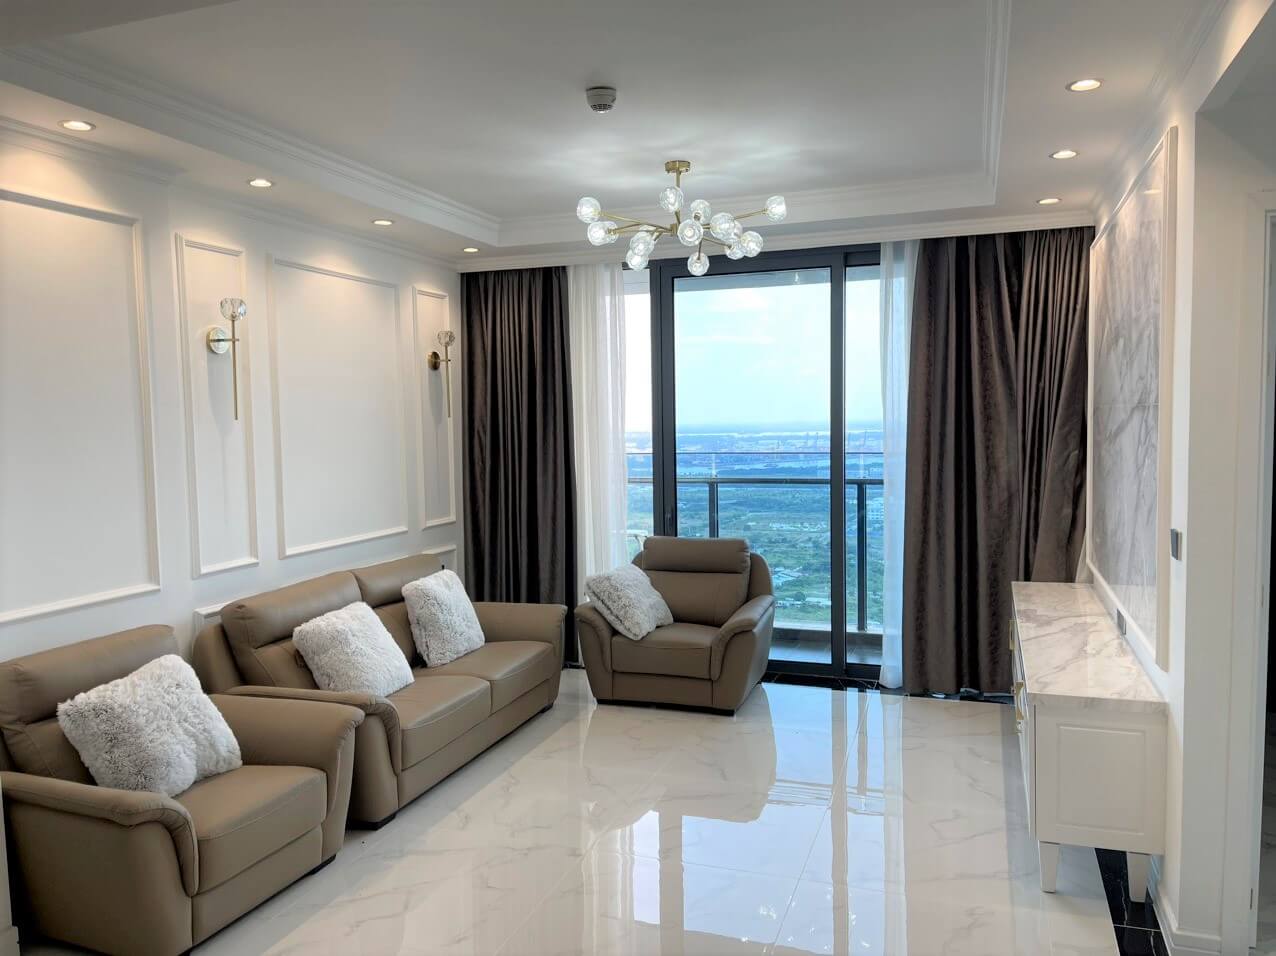 3 bedroom apartment for rent in Sunwah Pearl - The gorgeous Saigon River view